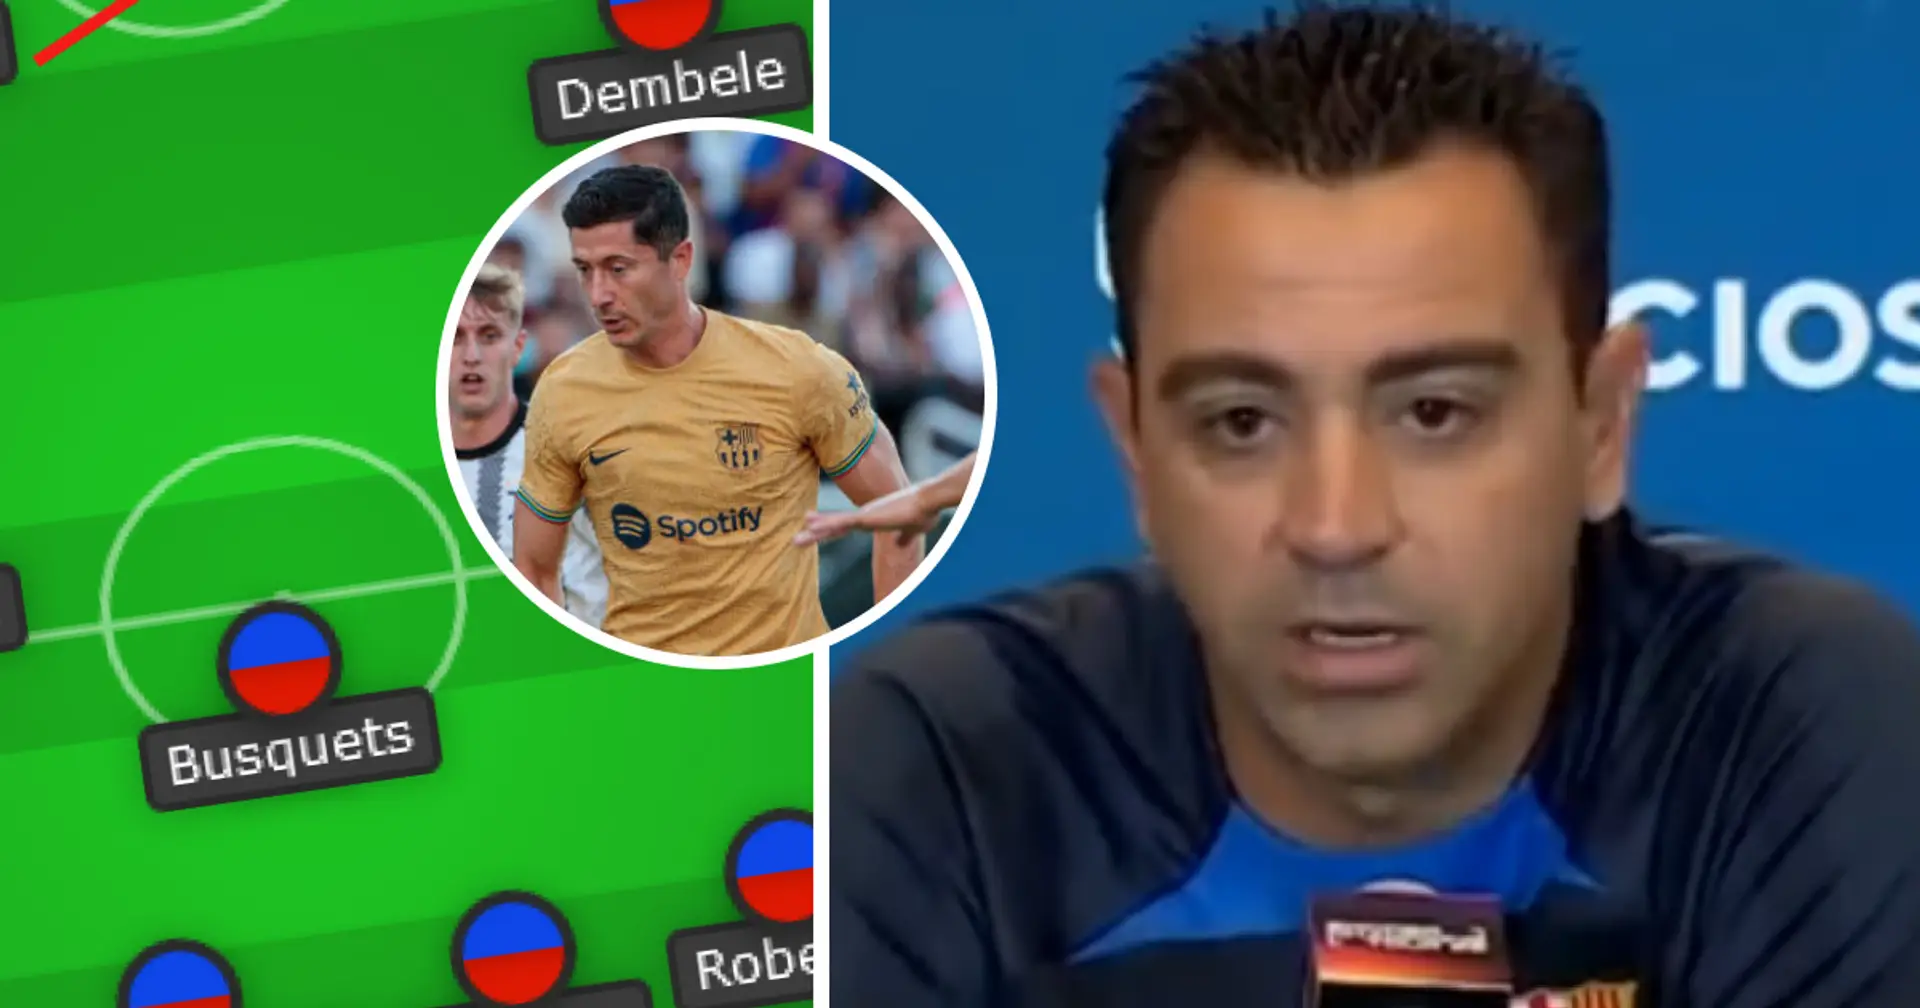 2 experiments attempted by Xavi against Juventus shown in lineup